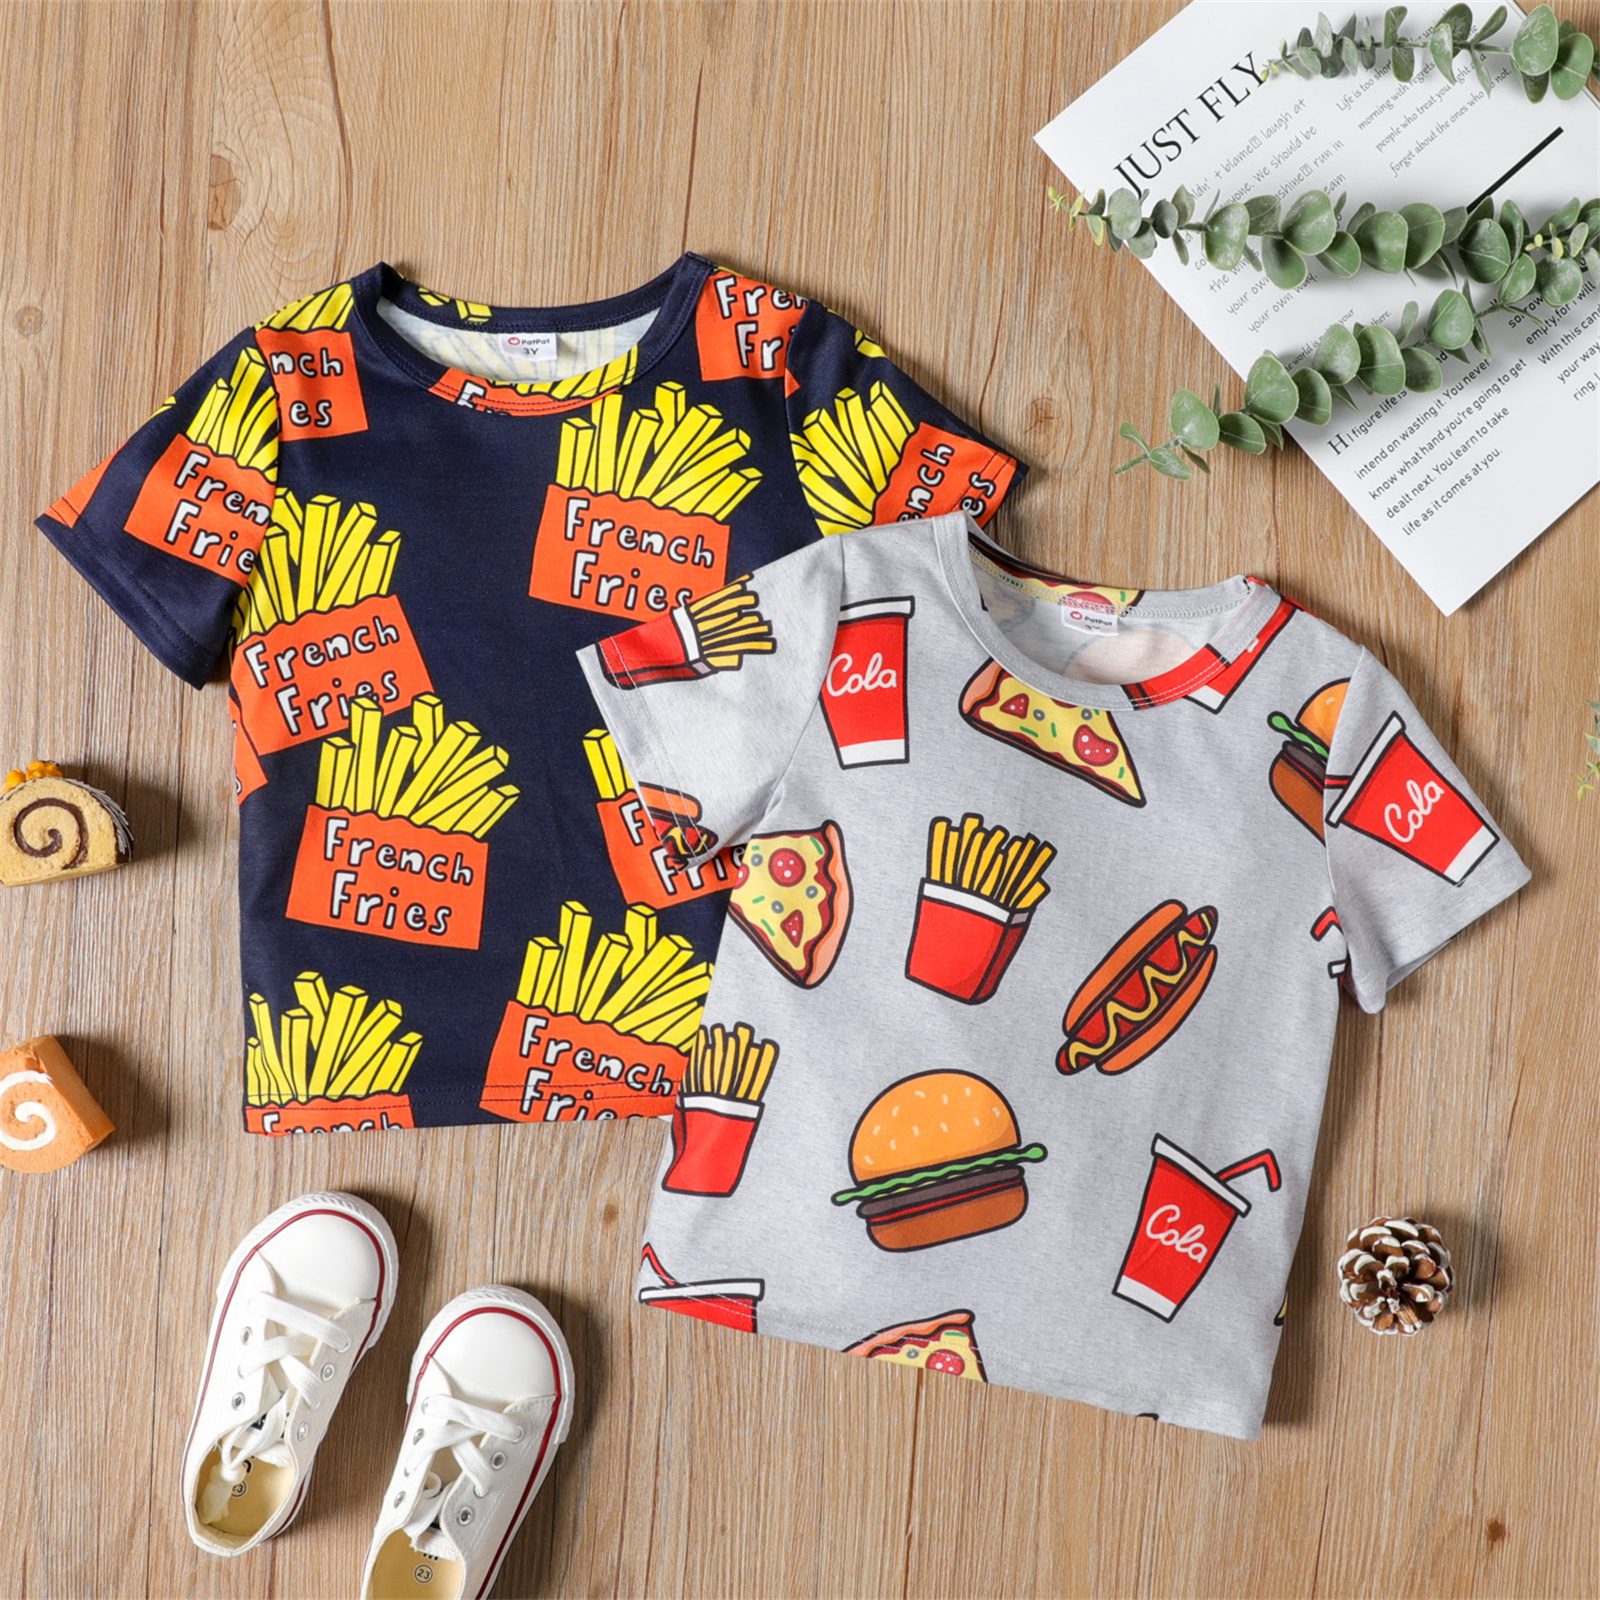 PatPat T-shirt For Boys Baby Boy Clothes Short-sleeve Tee Children Top T shirt For Summer Toddler Child Kids Clothes New Arrival